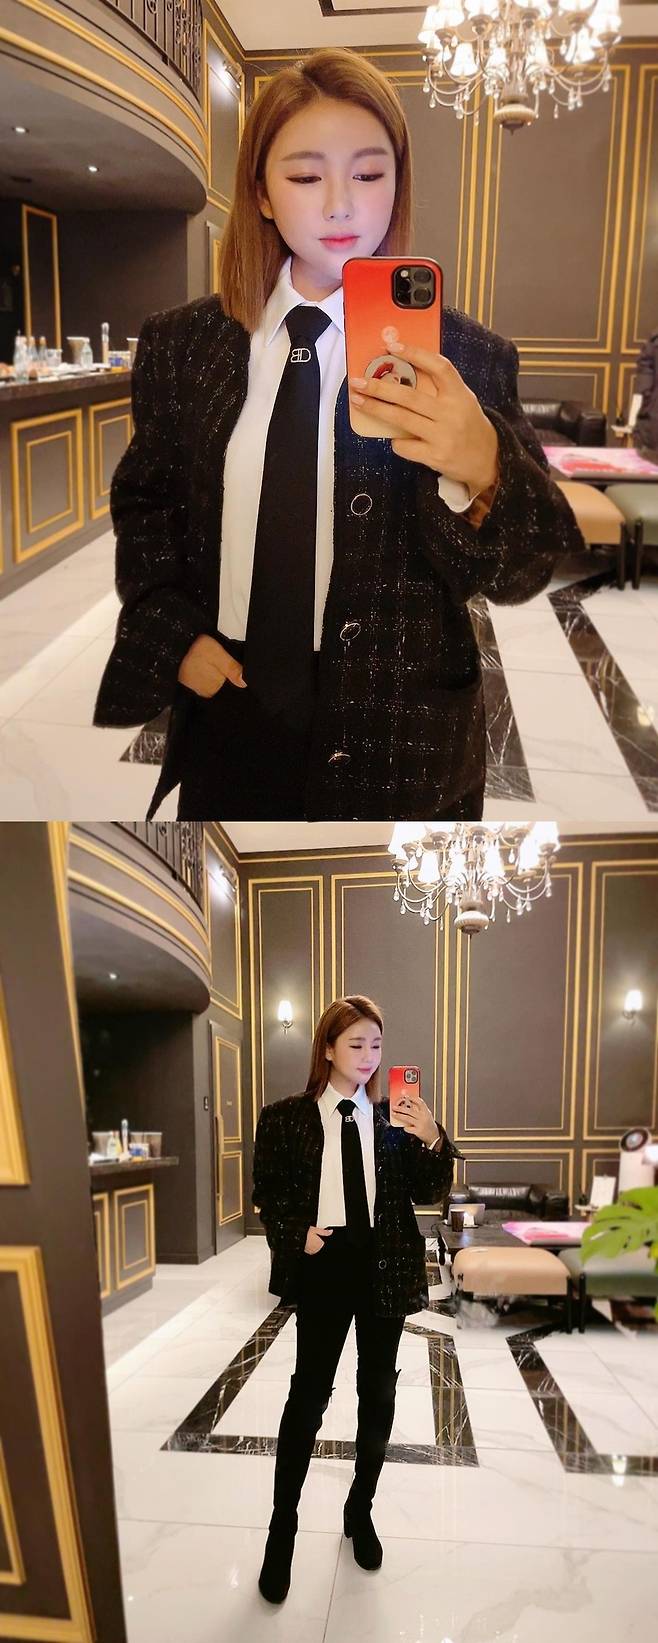 Singer Song Ga-in has revealed her appearance in a nice suit ahead of her film release.Song Ga-in released a photo on his instagram on the afternoon of the 9th with an article entitled Song Ga-in the Drama VIP premiere.The photo shows Song Ga-in wearing a tie, not a dress, and dressed in an all-black suit style.In 180 Degree different styling from usual, Song Ga-ins unique charm is filled with admiration.Song Ga-in is about to release the movie Song Ga-in the Drama on November 11. Song Ga-in the Drama is a TV ship Tomorrow is Miss Mr.Trot Winner Song Ga-ins first solo concert preparation process, the live performance of the hot performance, and the concert movie that conveys the impression of the day directly to the interview.On the other hand, Song Ga-in continues to play in various programs including KBS Mr. Trot National Sports Festival.=